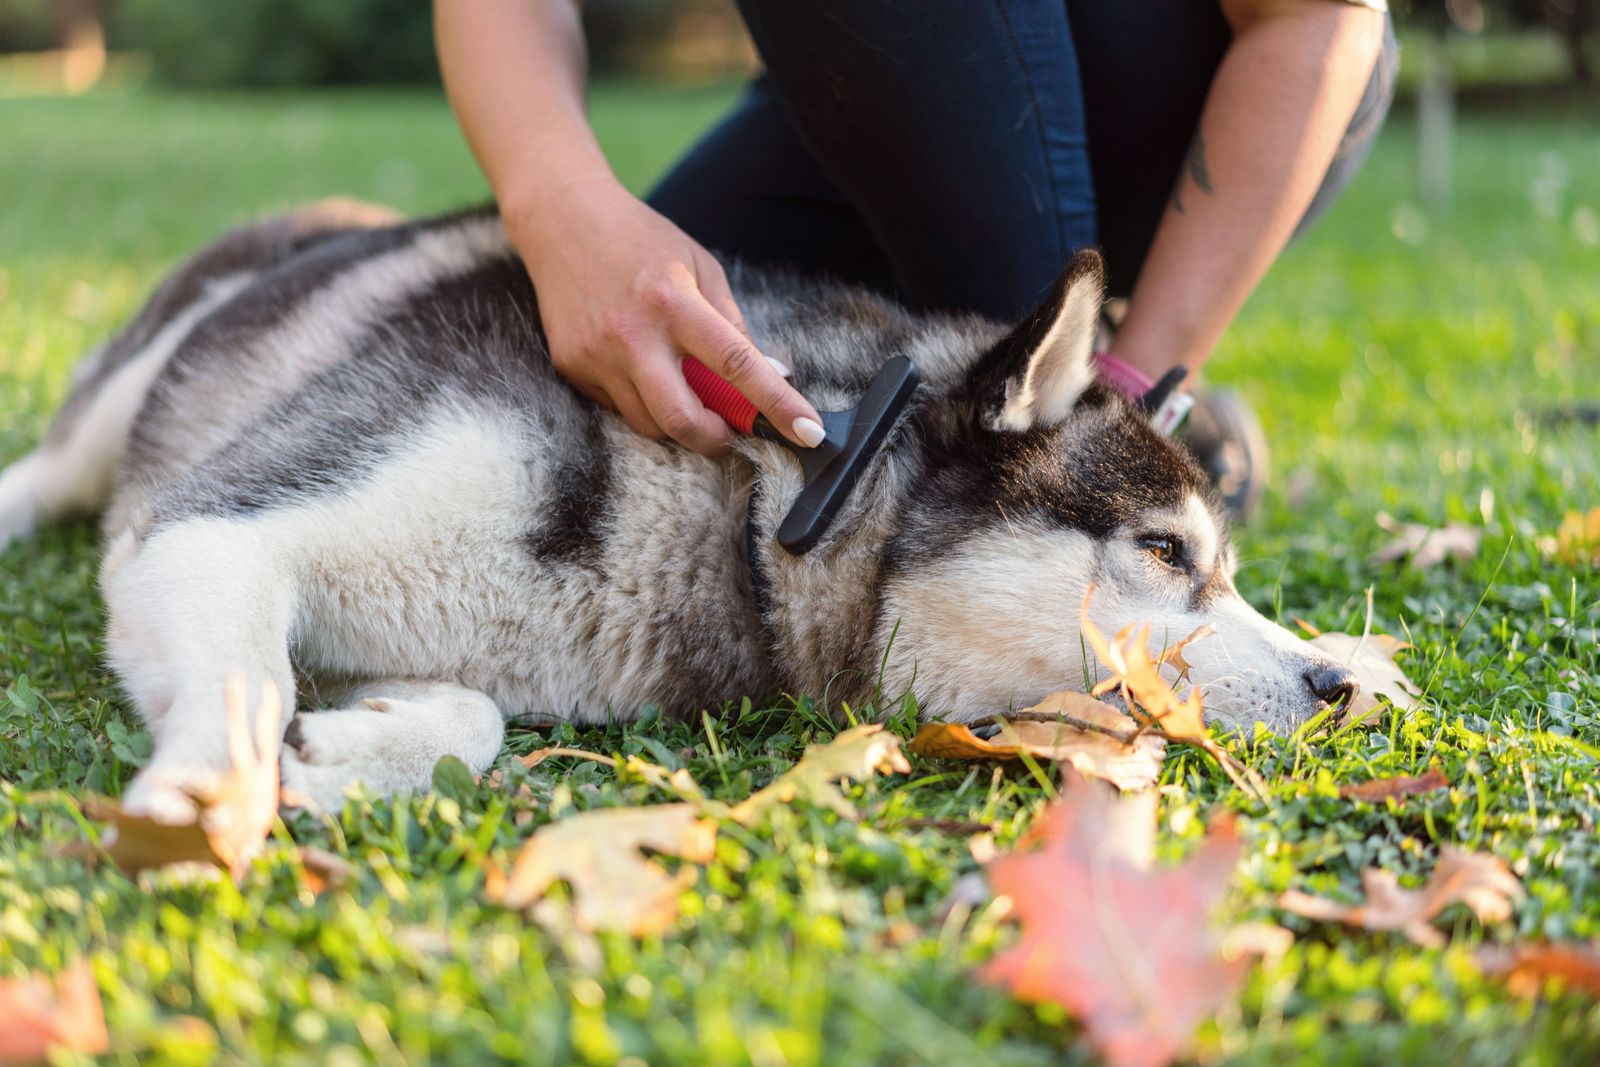 Pet shedding more than ever? Yep, it’s spring - a husky lying on the grass being brushed